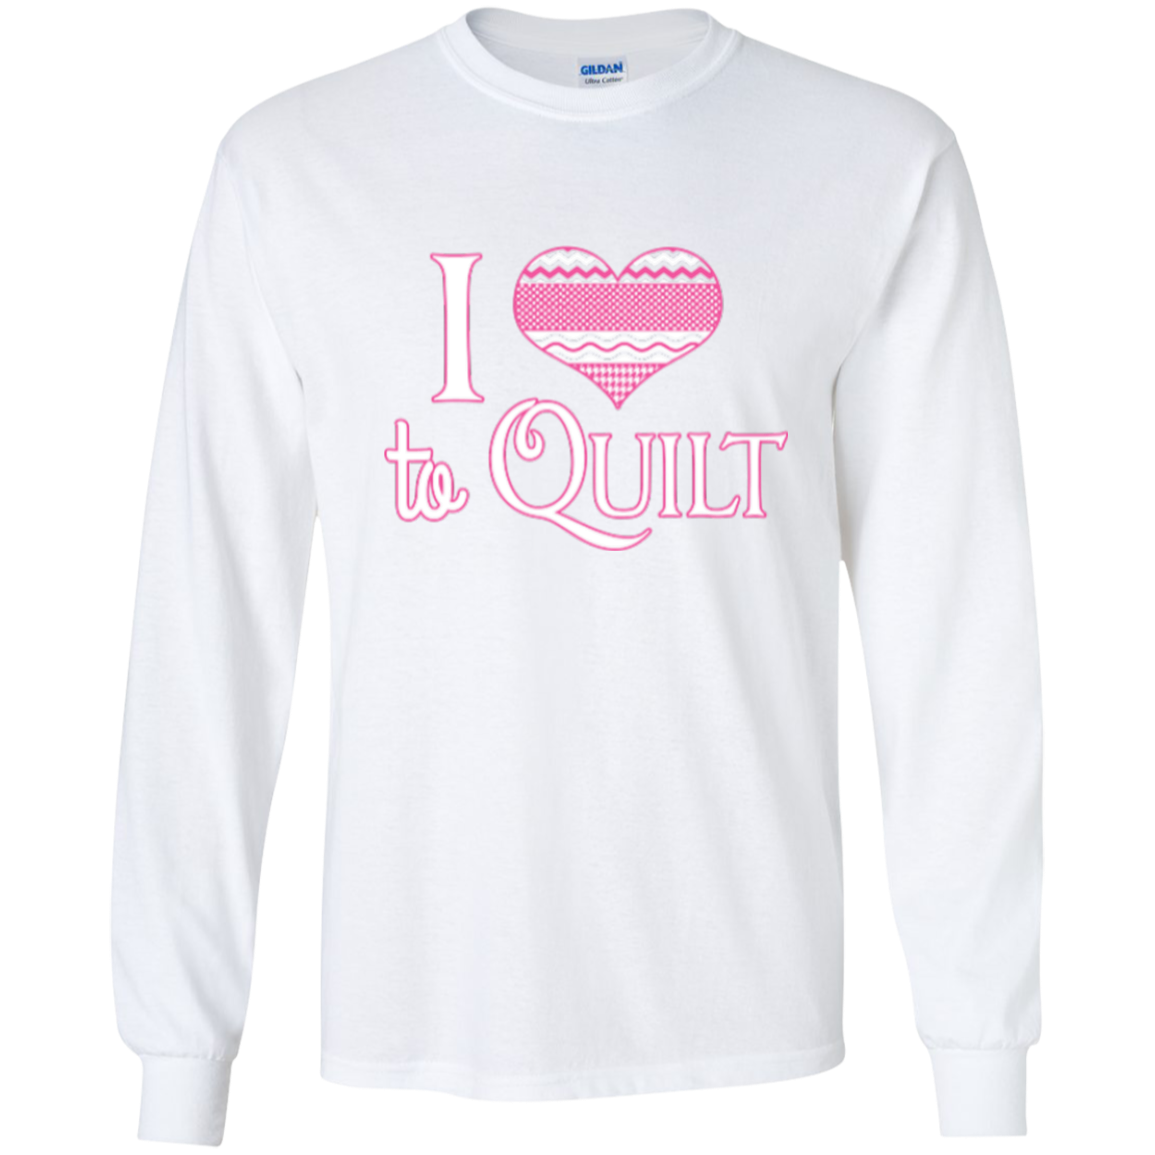 I Heart to Quilt Long Sleeve Ultra Cotton T-Shirt - Crafter4Life - 2